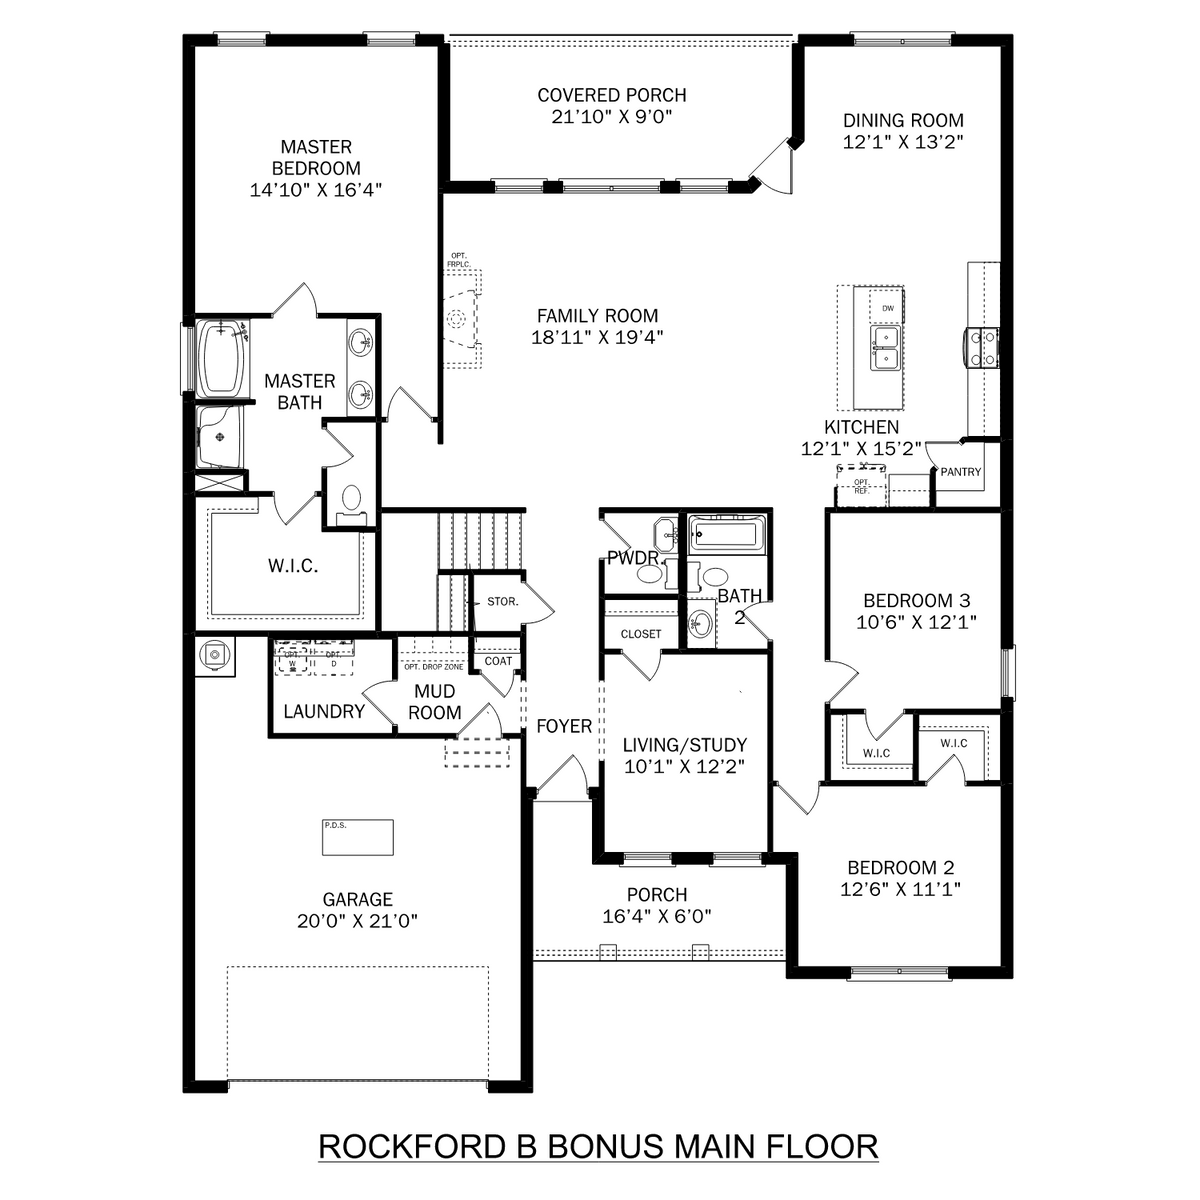 1 - The Rockford B with Bonus buildable floor plan layout in Davidson Homes' River Road Estates community.